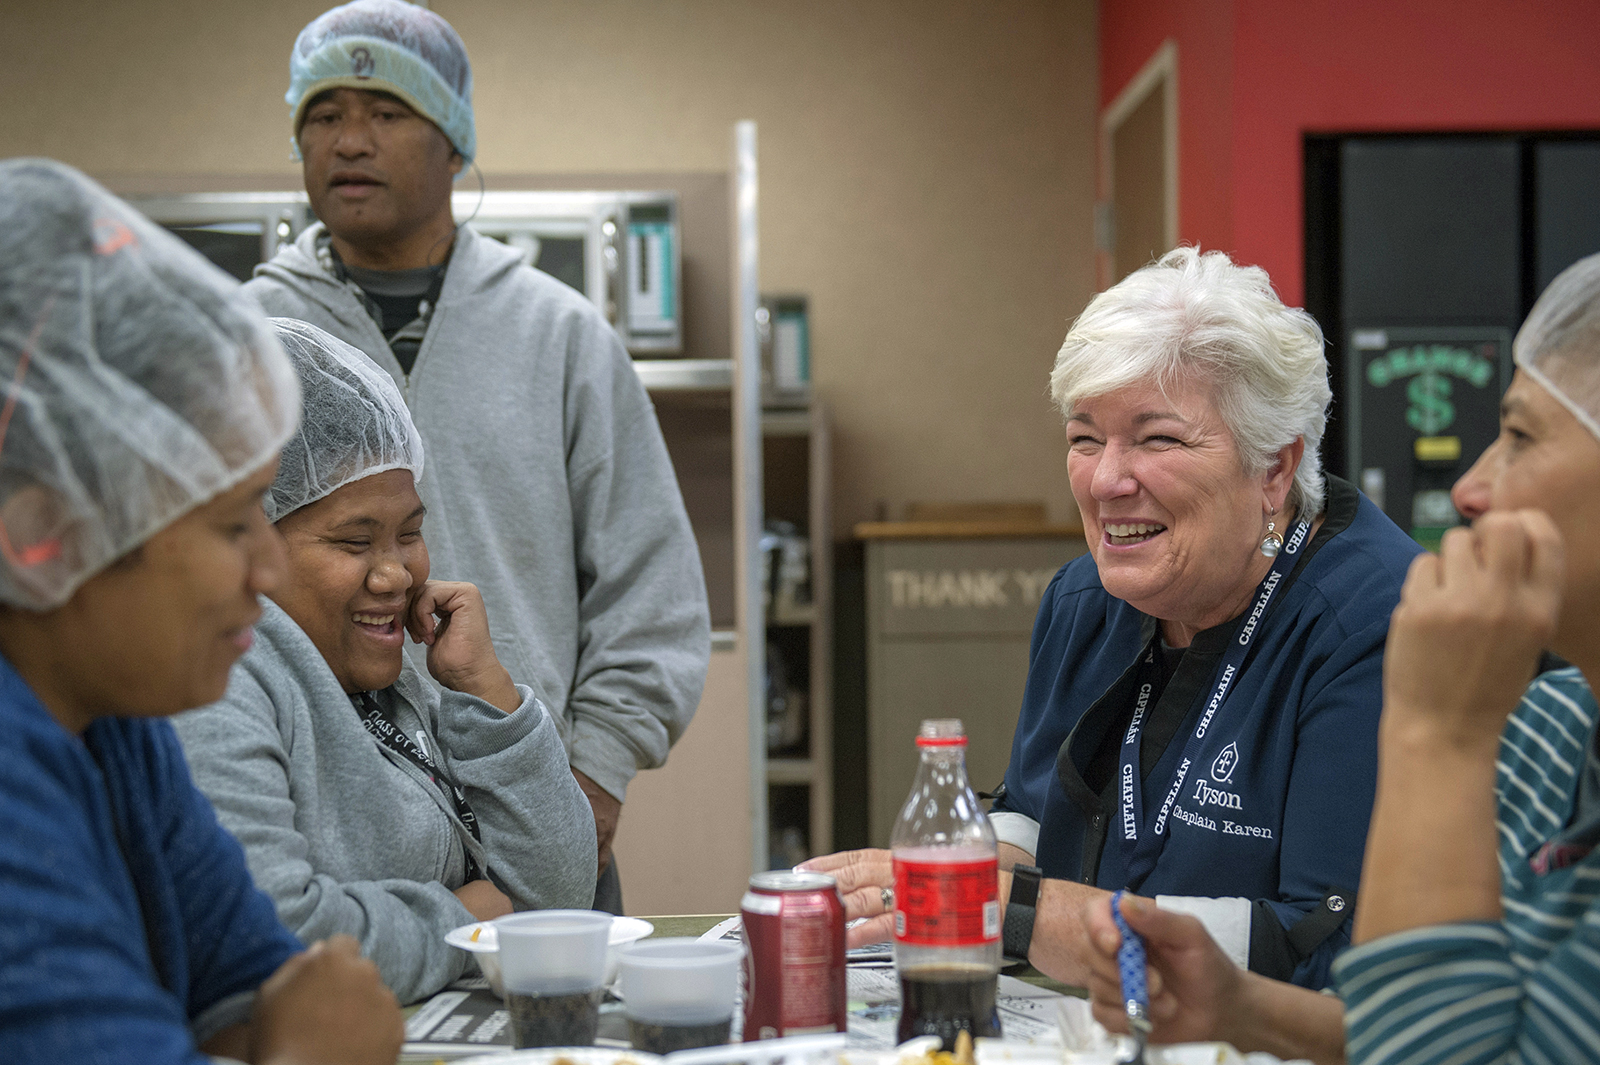 Karen Diefendorf, second right, director of Chaplain Services at Tyson Foods, talks with employees at the company's Berry St. poultry plant in October 2018 in Springdale, Arkansas. The company deploys a team of more than 90 chaplains to comfort and counsel employees at its plants and offices. The program began in 2000. (Logan Webster/Tyson Foods via AP)